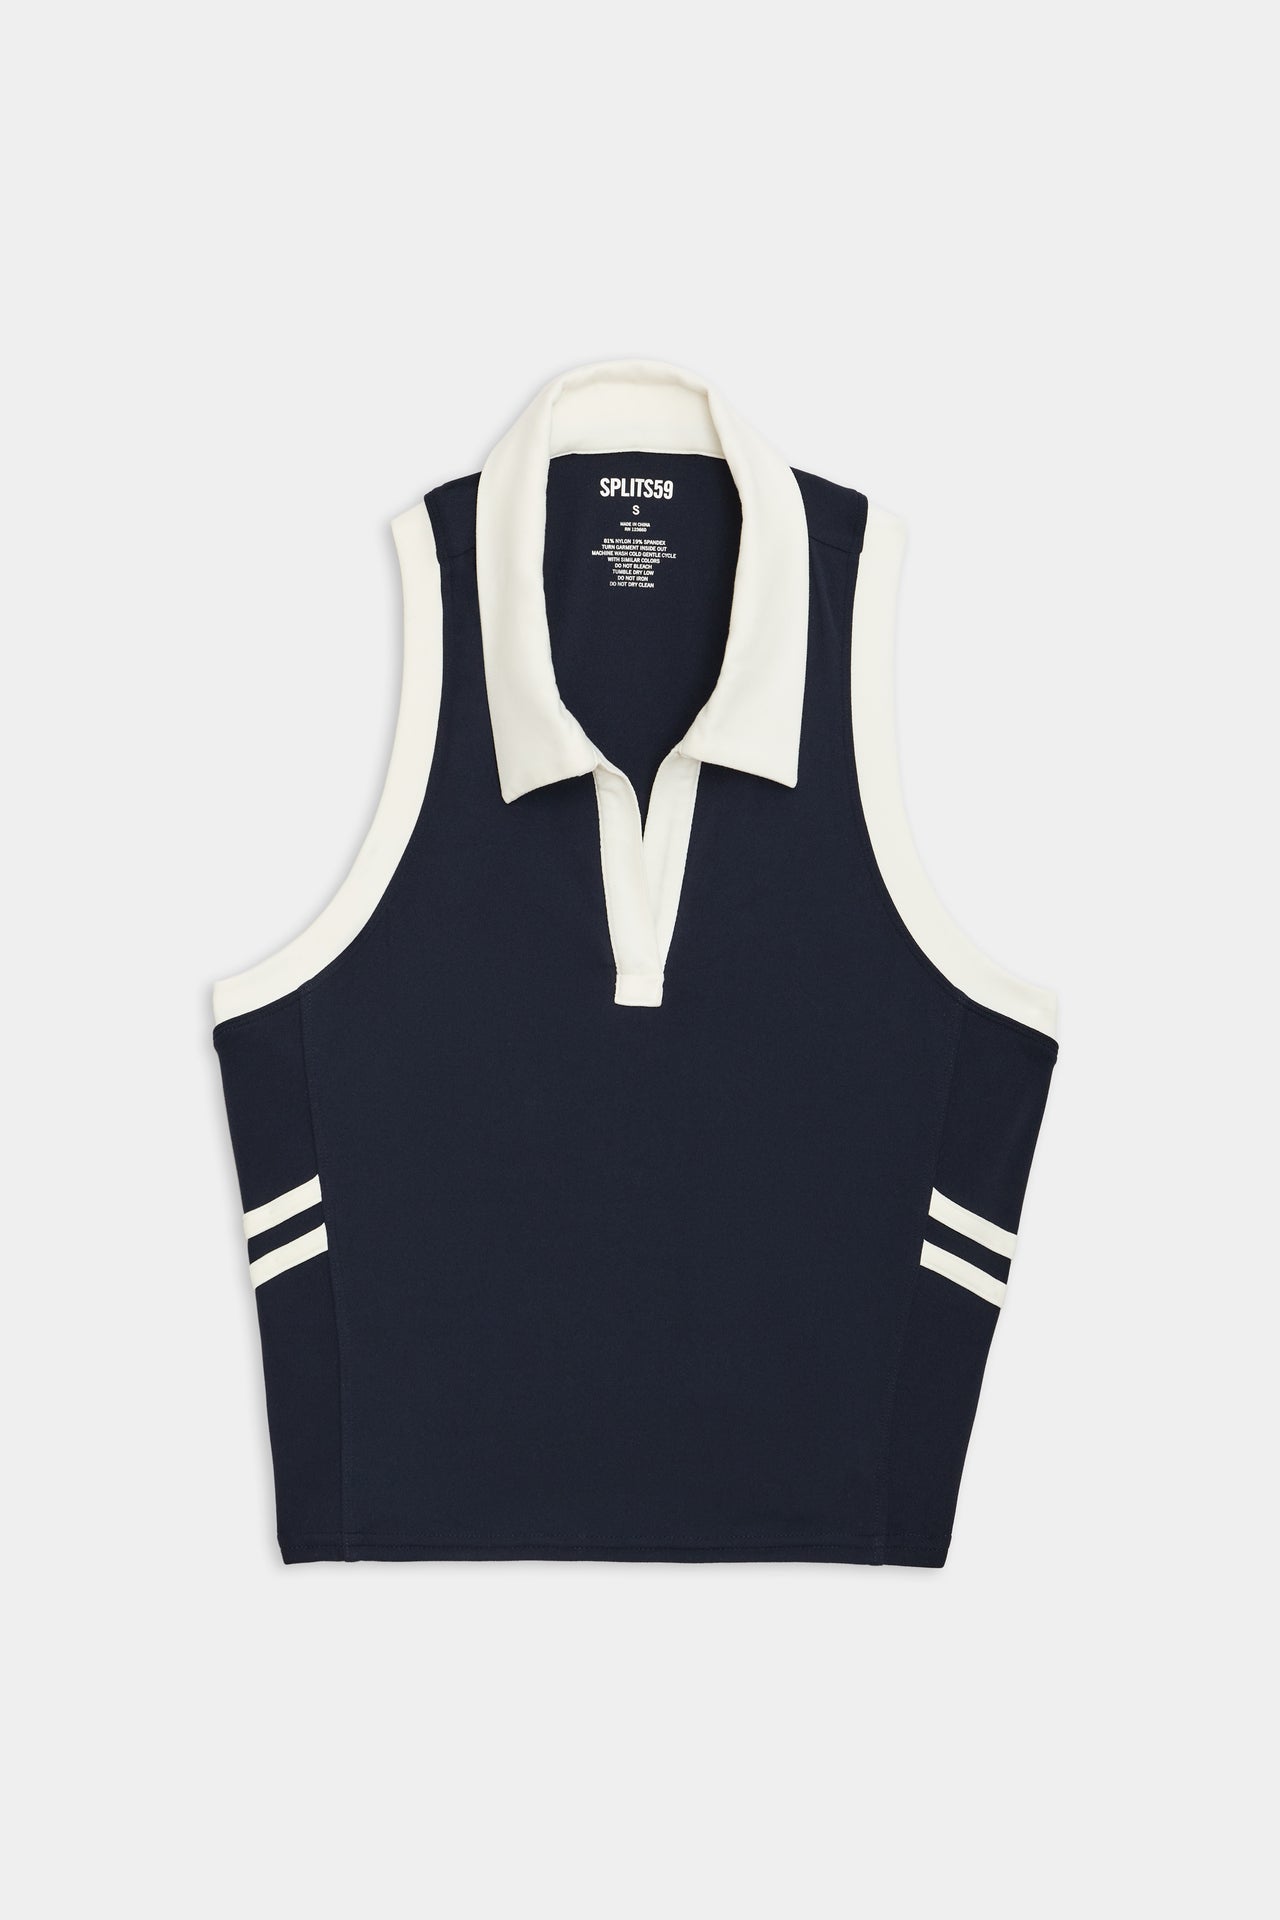 Austin Airweight Crop Polo - Indigo/White by SPLITS59, a navy blue and white sleeveless collared shirt made of nylon spandex fabric, with stripe details on the shoulders, displayed against a white background.